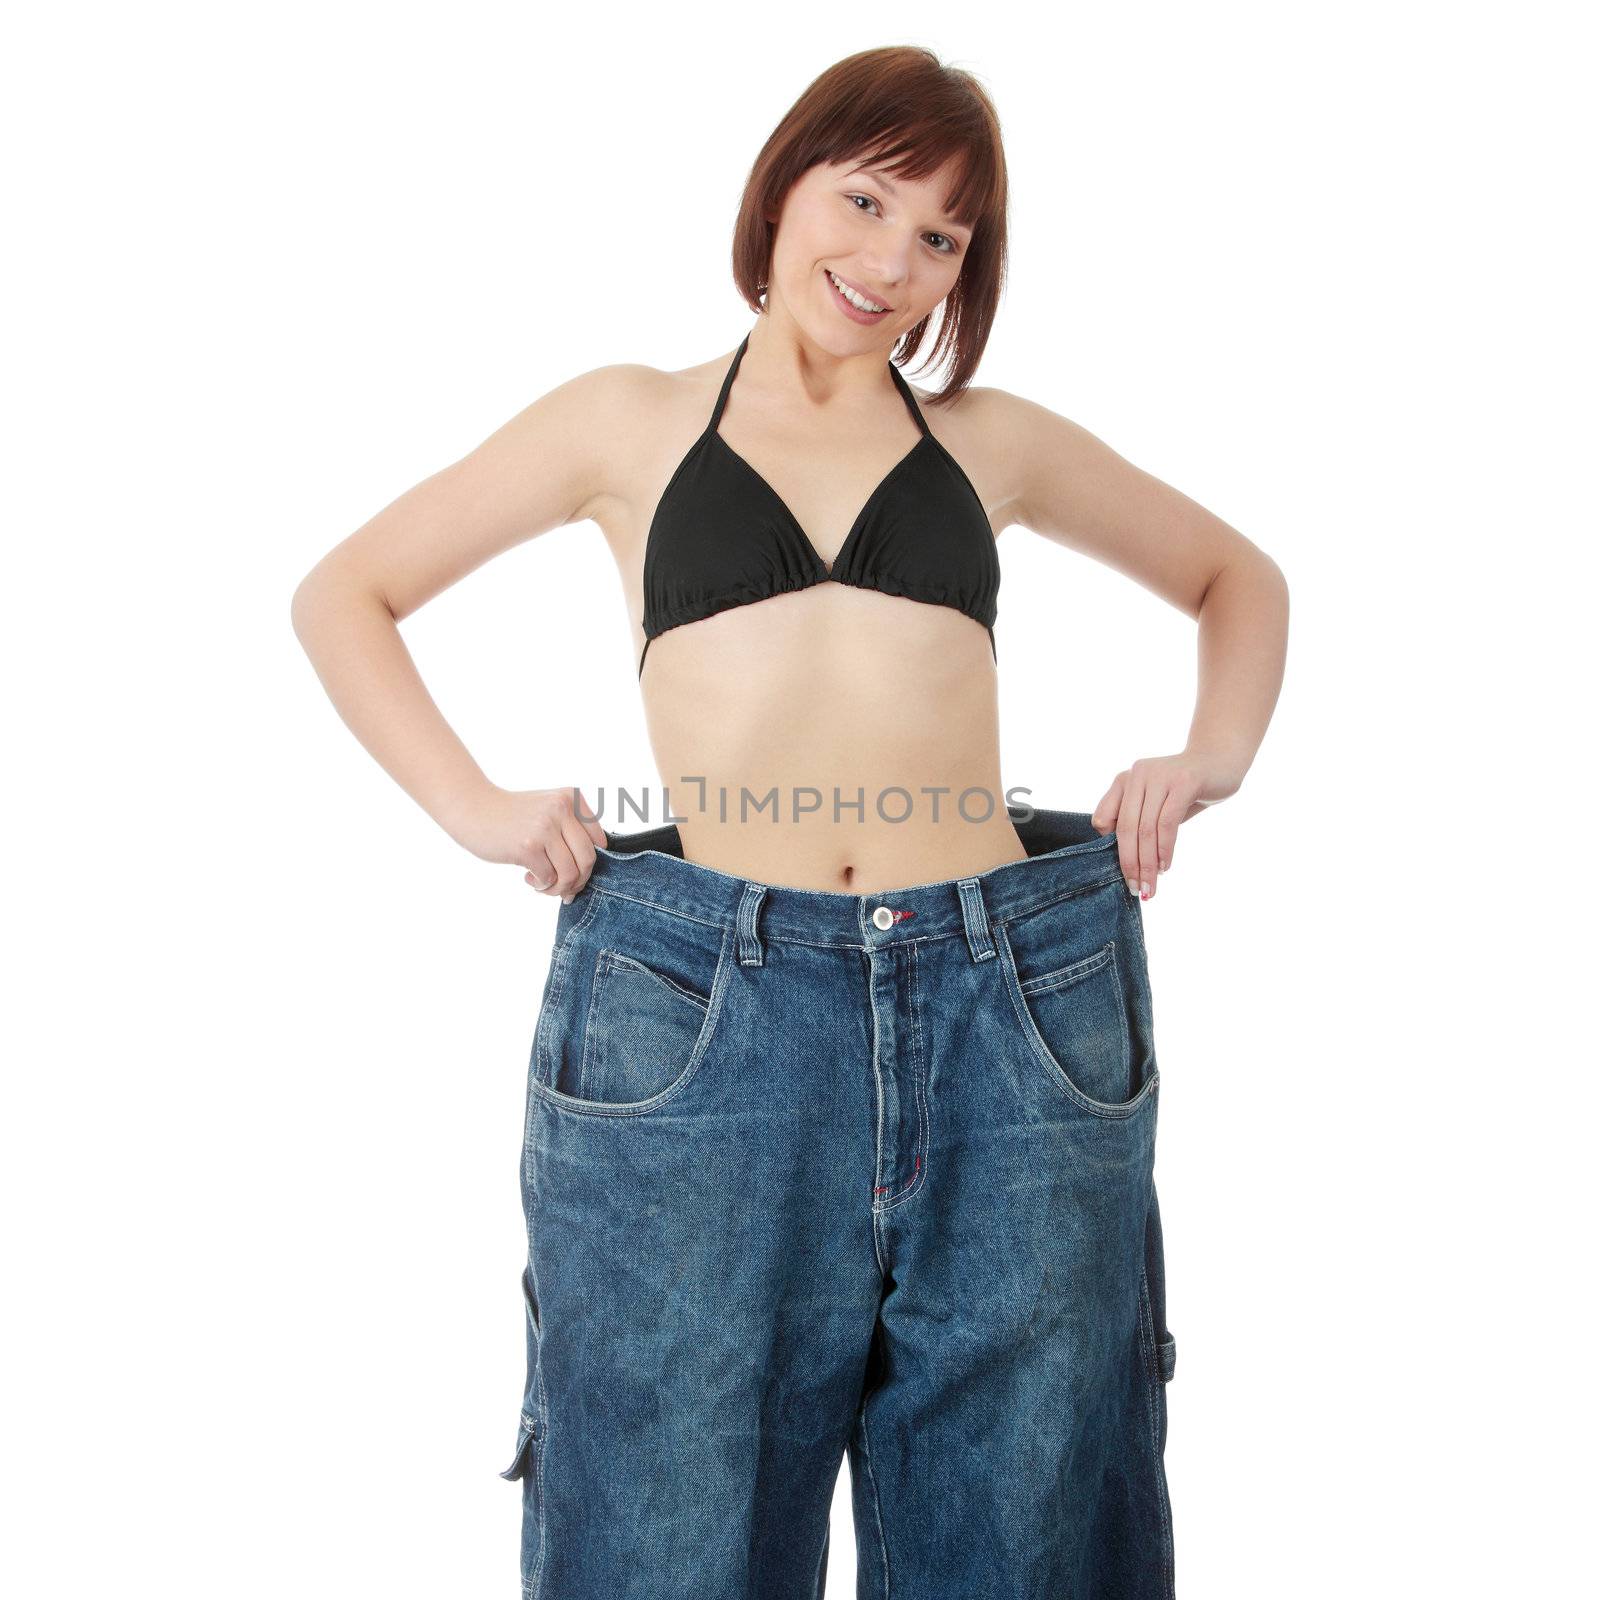 Teen woman showing how much weight she lost. Isolated on white